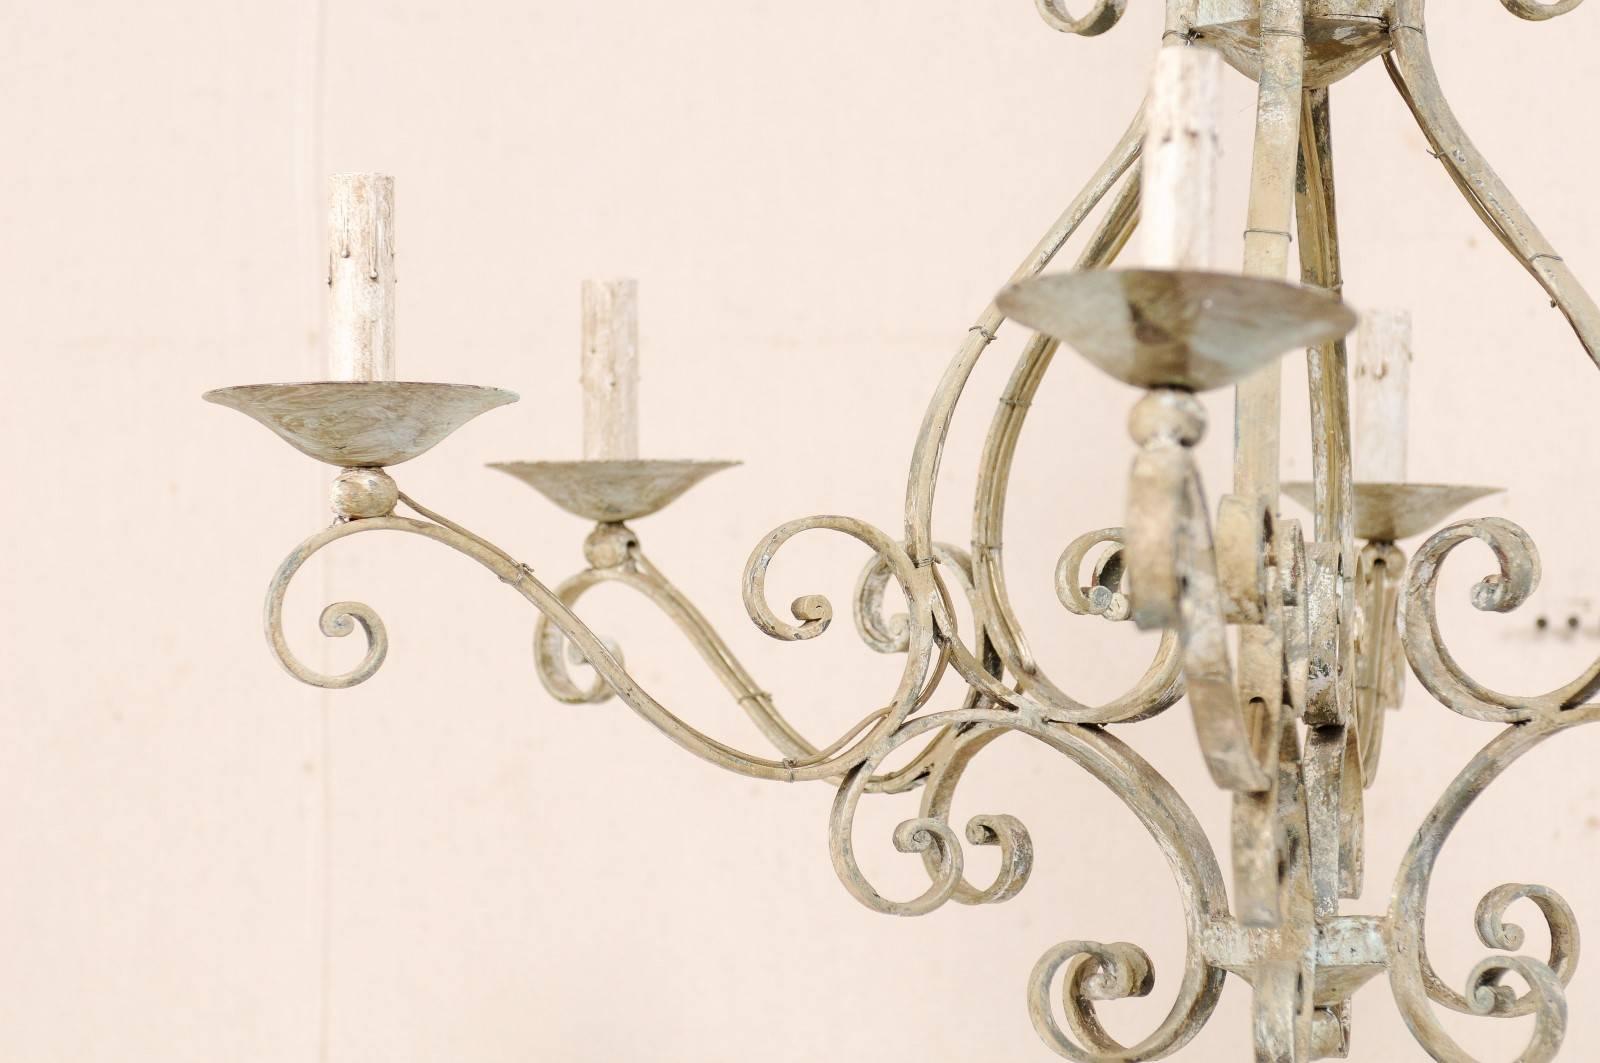 French Mid-20th Century Iron Chandelier Painted with Neutral Beige & Tan Colors 1